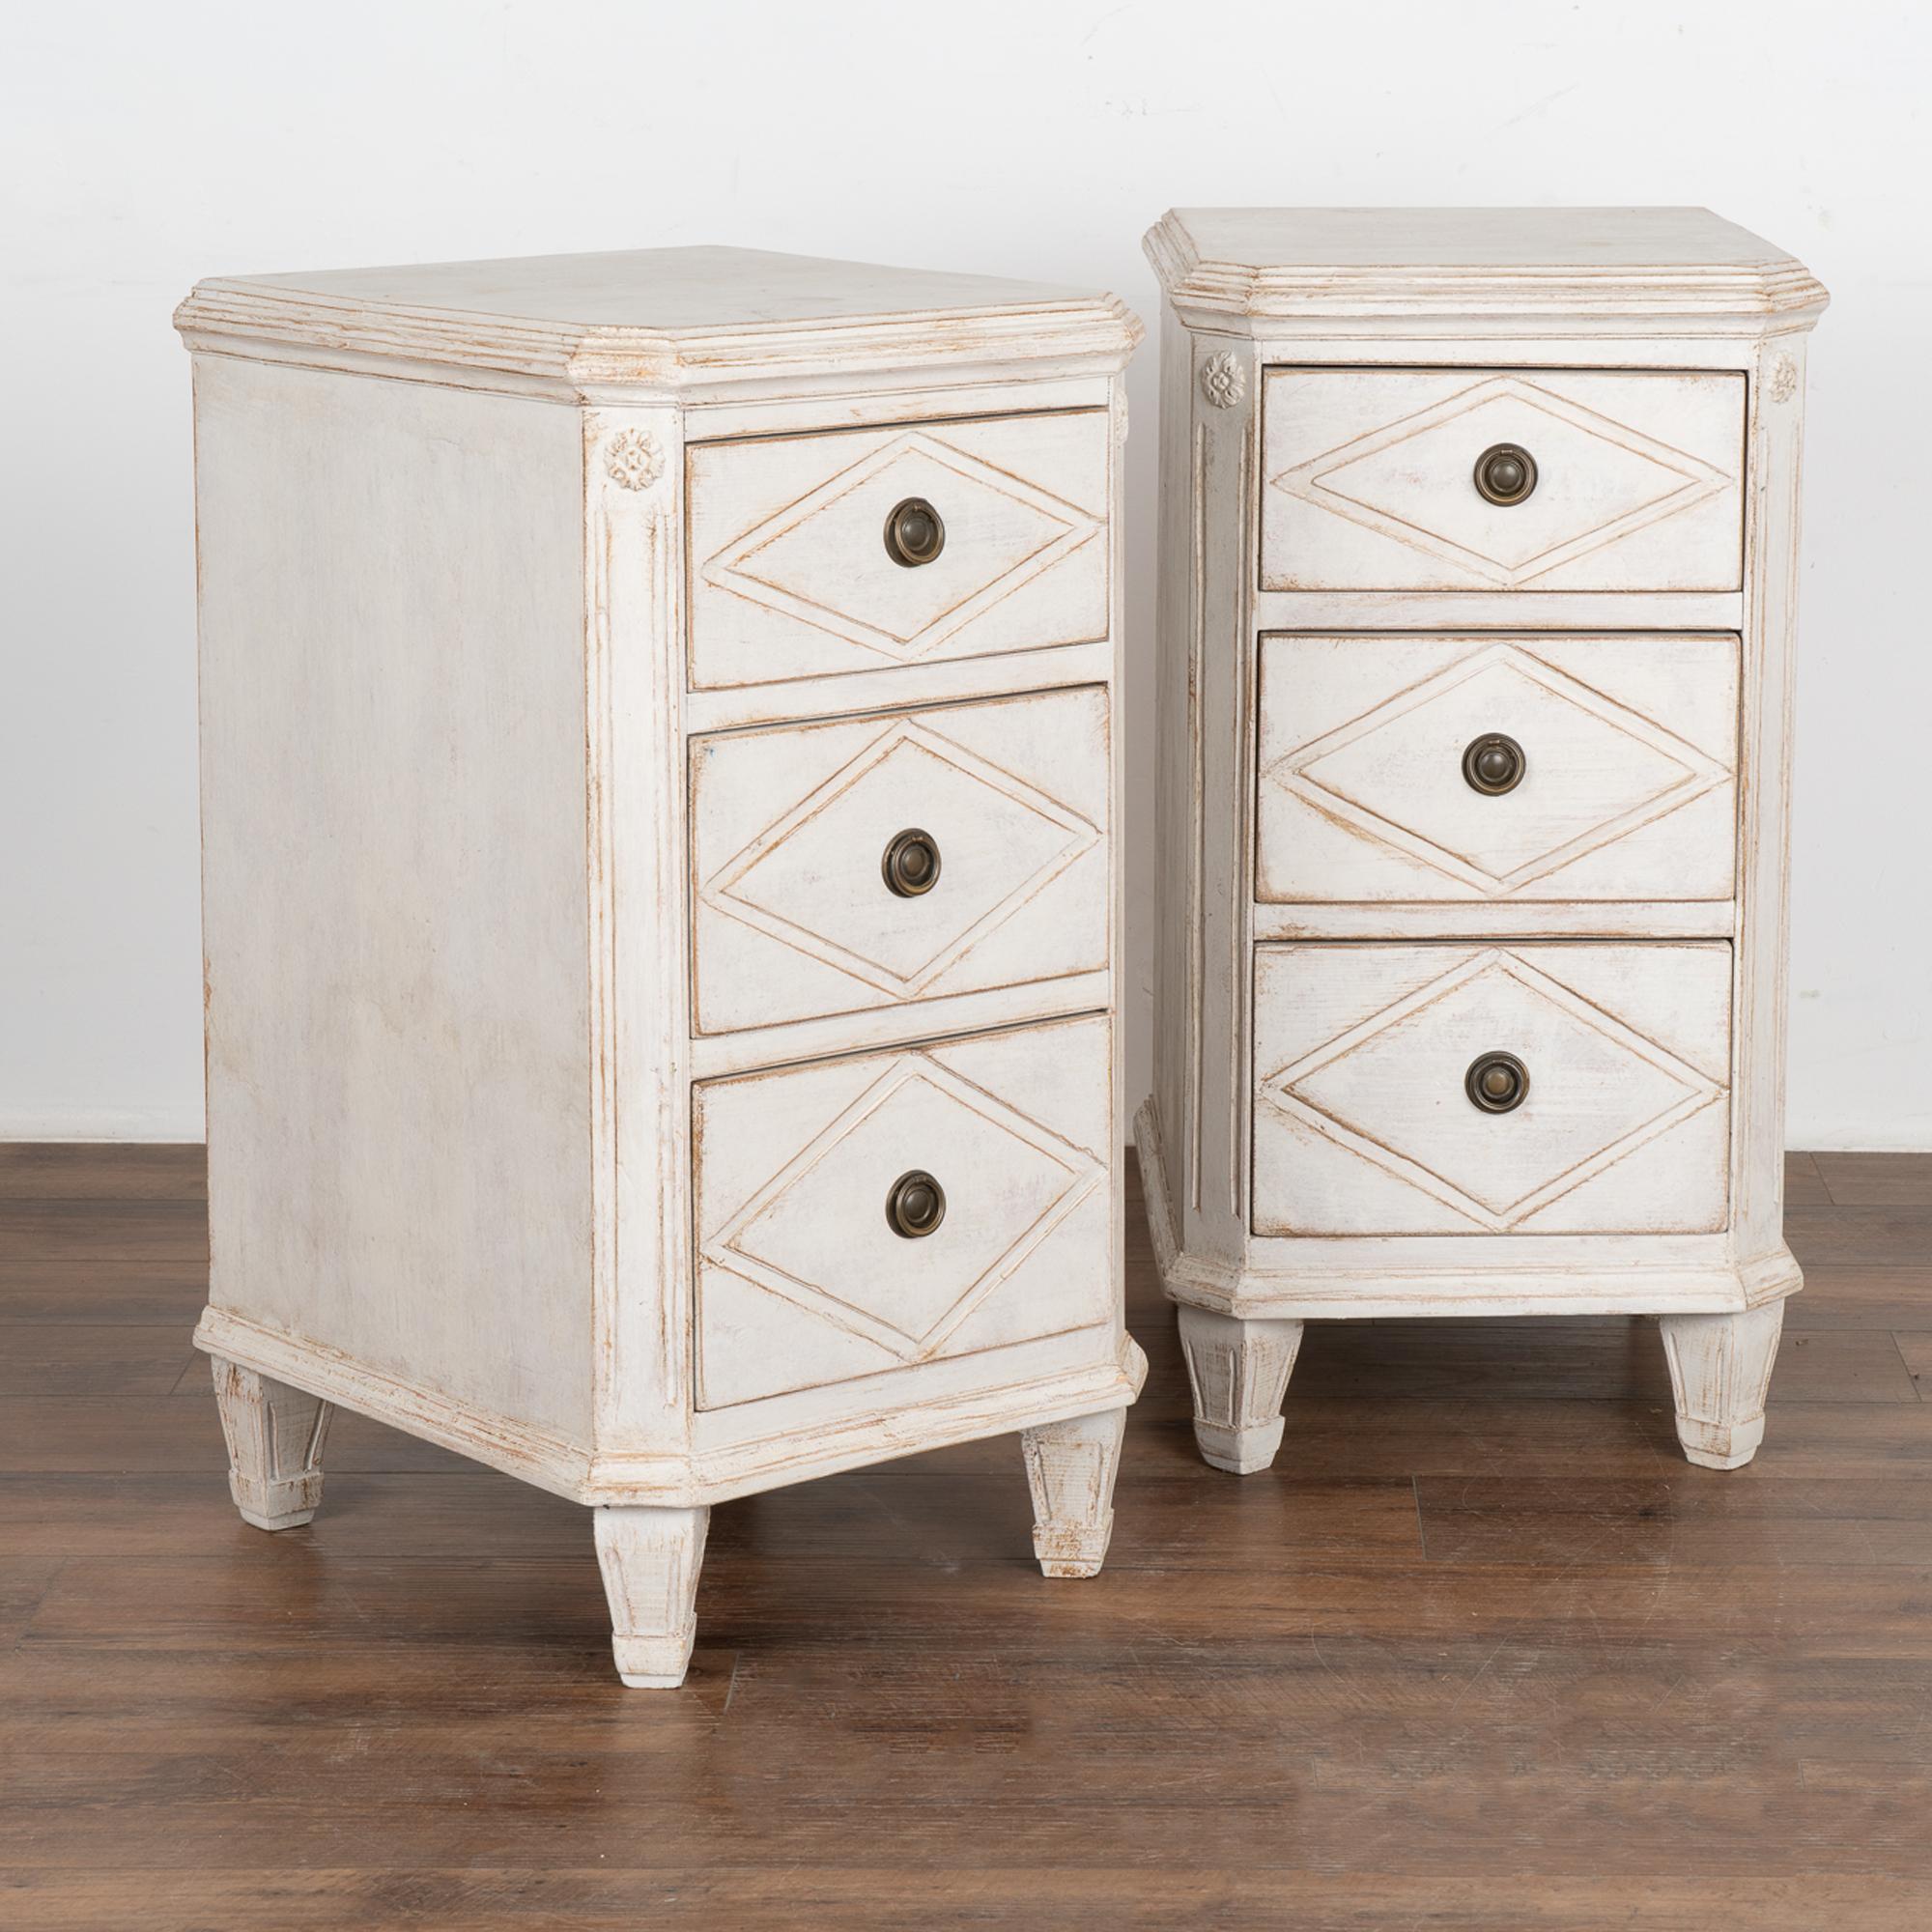 Pair, Gustavian style small chest of drawers with fluted canted sides and fluted tapered feet perfect to use as nightstands or small side tables. 
The three drawers each have a single brass pull and decorative diamond shaped panels, a favorite